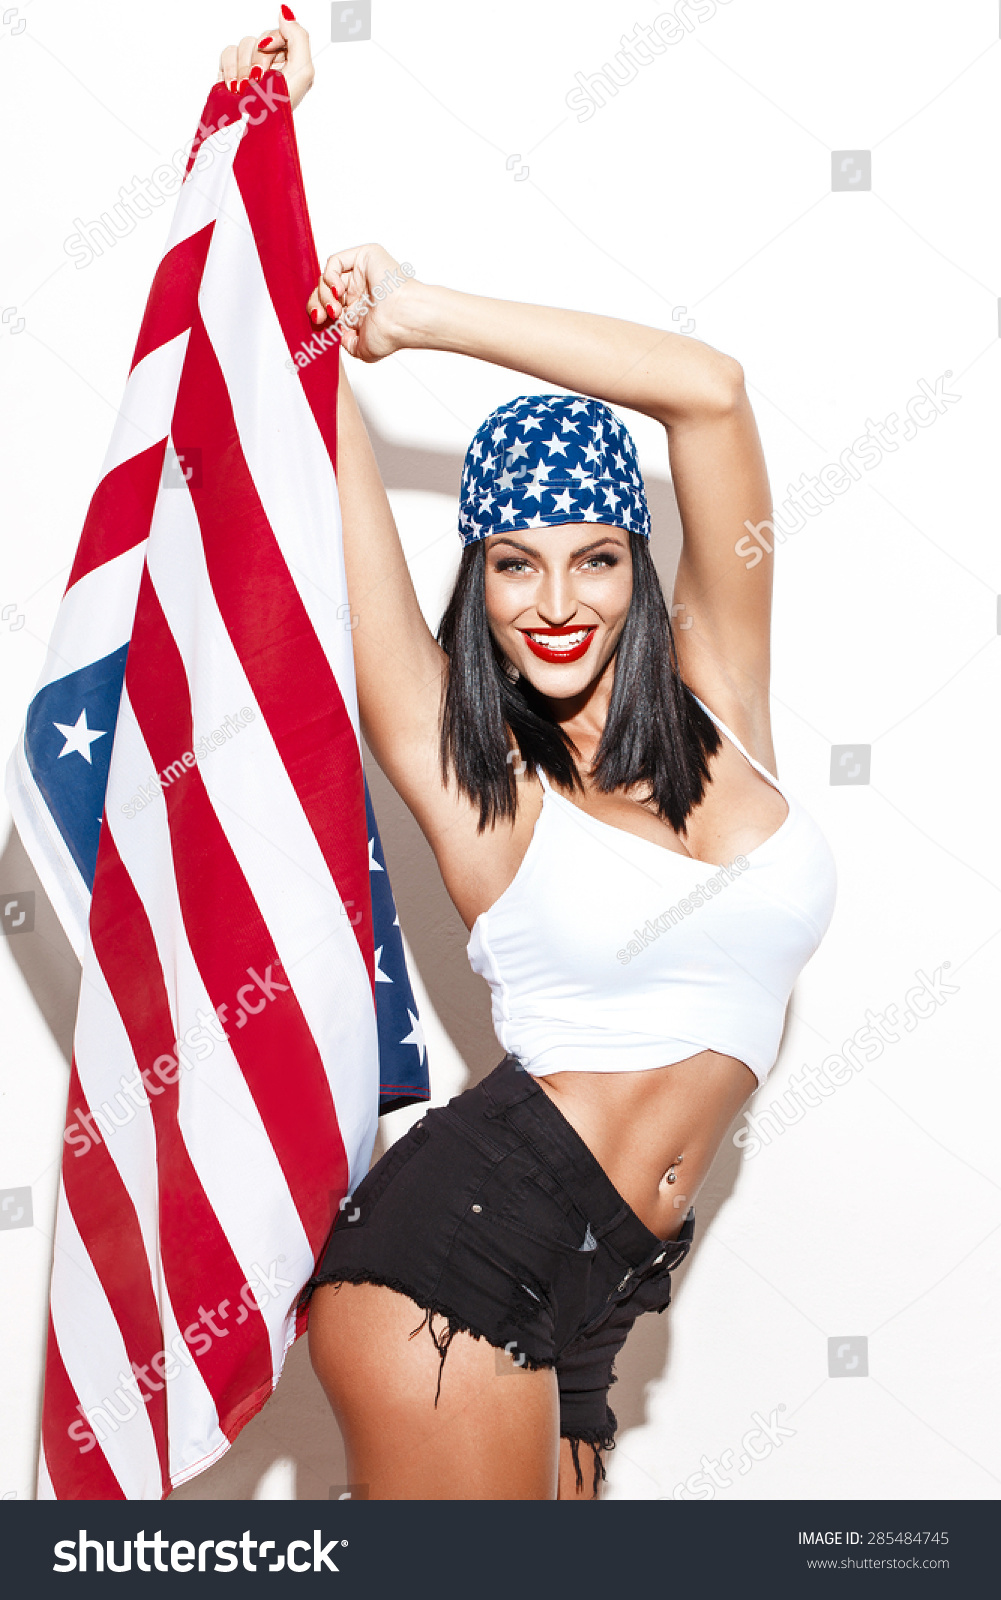 stock-photo-sexy-woman-holding-usa-flag-in-headscarf-at-white-wall-fourth-of-july-independence-day-285484745.jpg